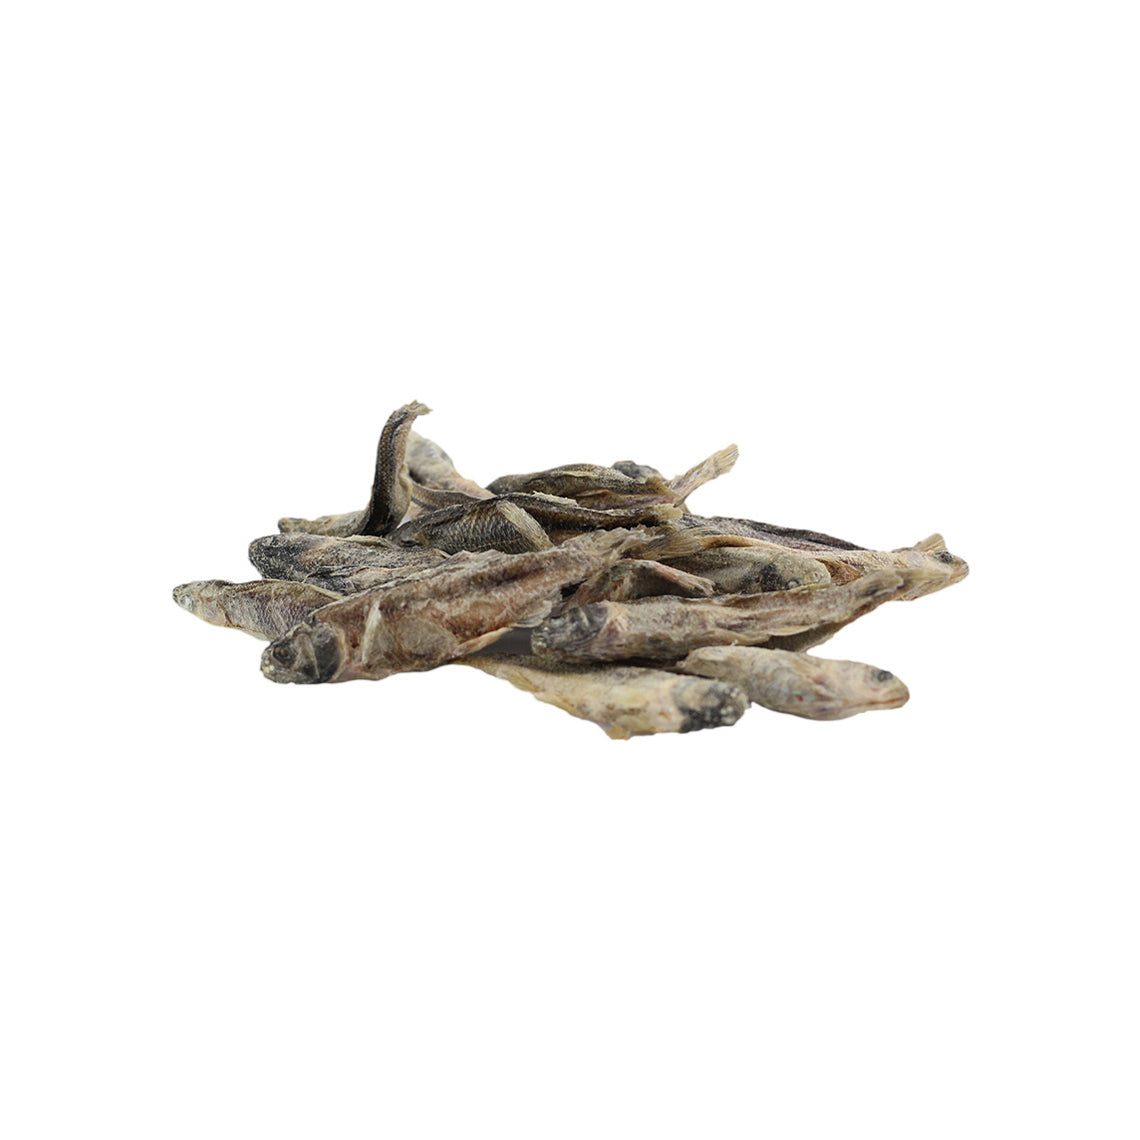 ProteinBites Minnow Treats for Dogs